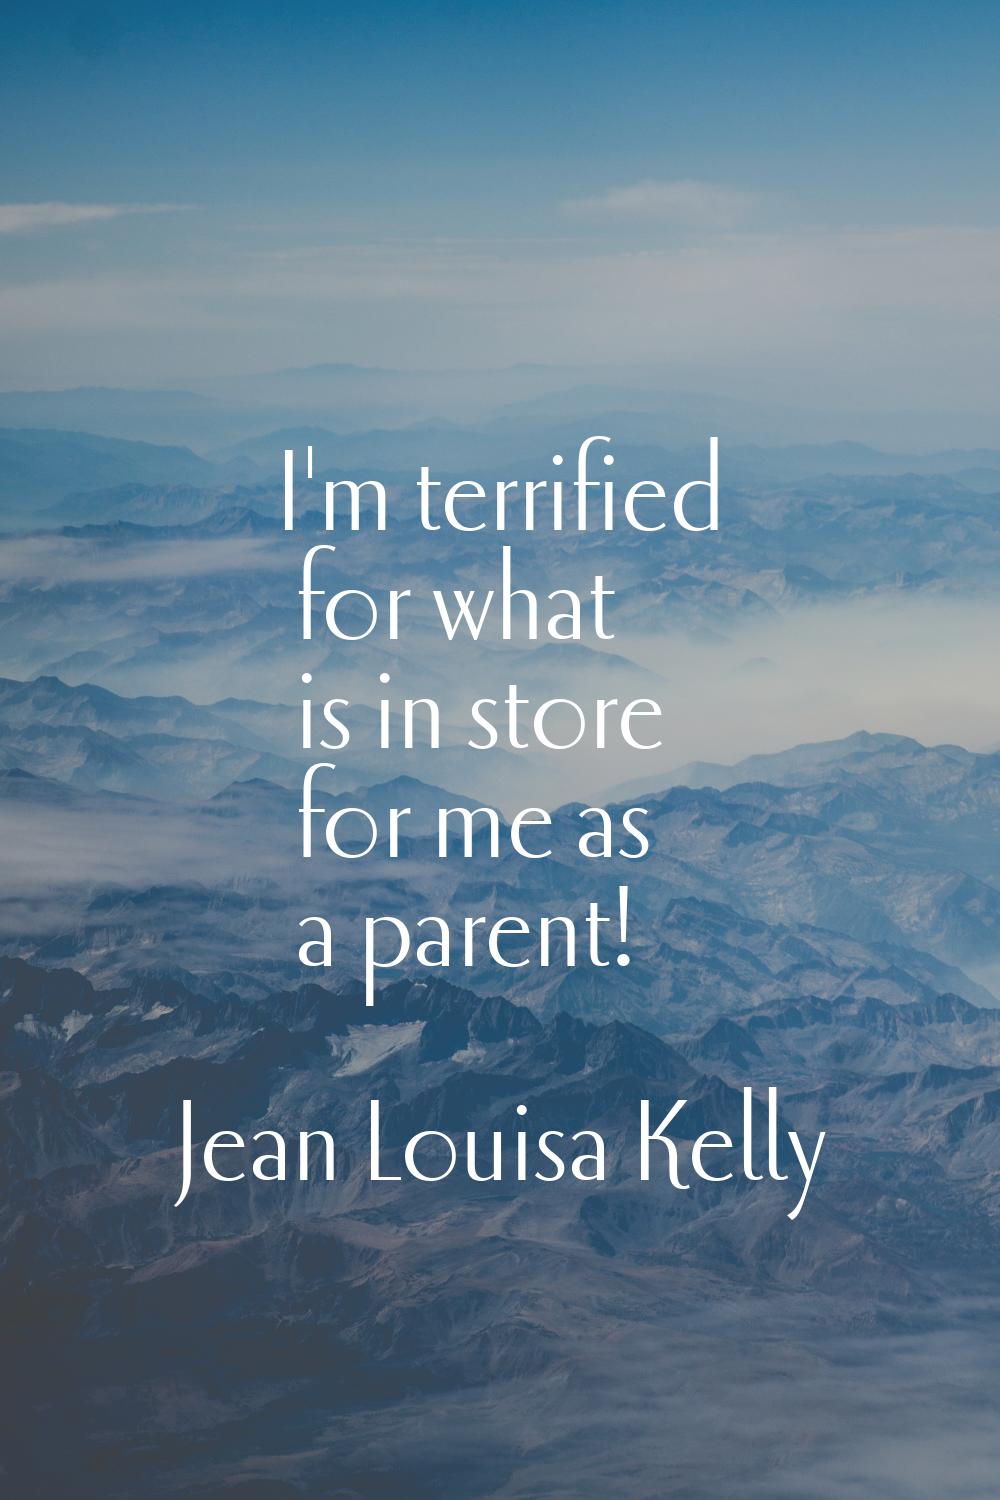 I'm terrified for what is in store for me as a parent!